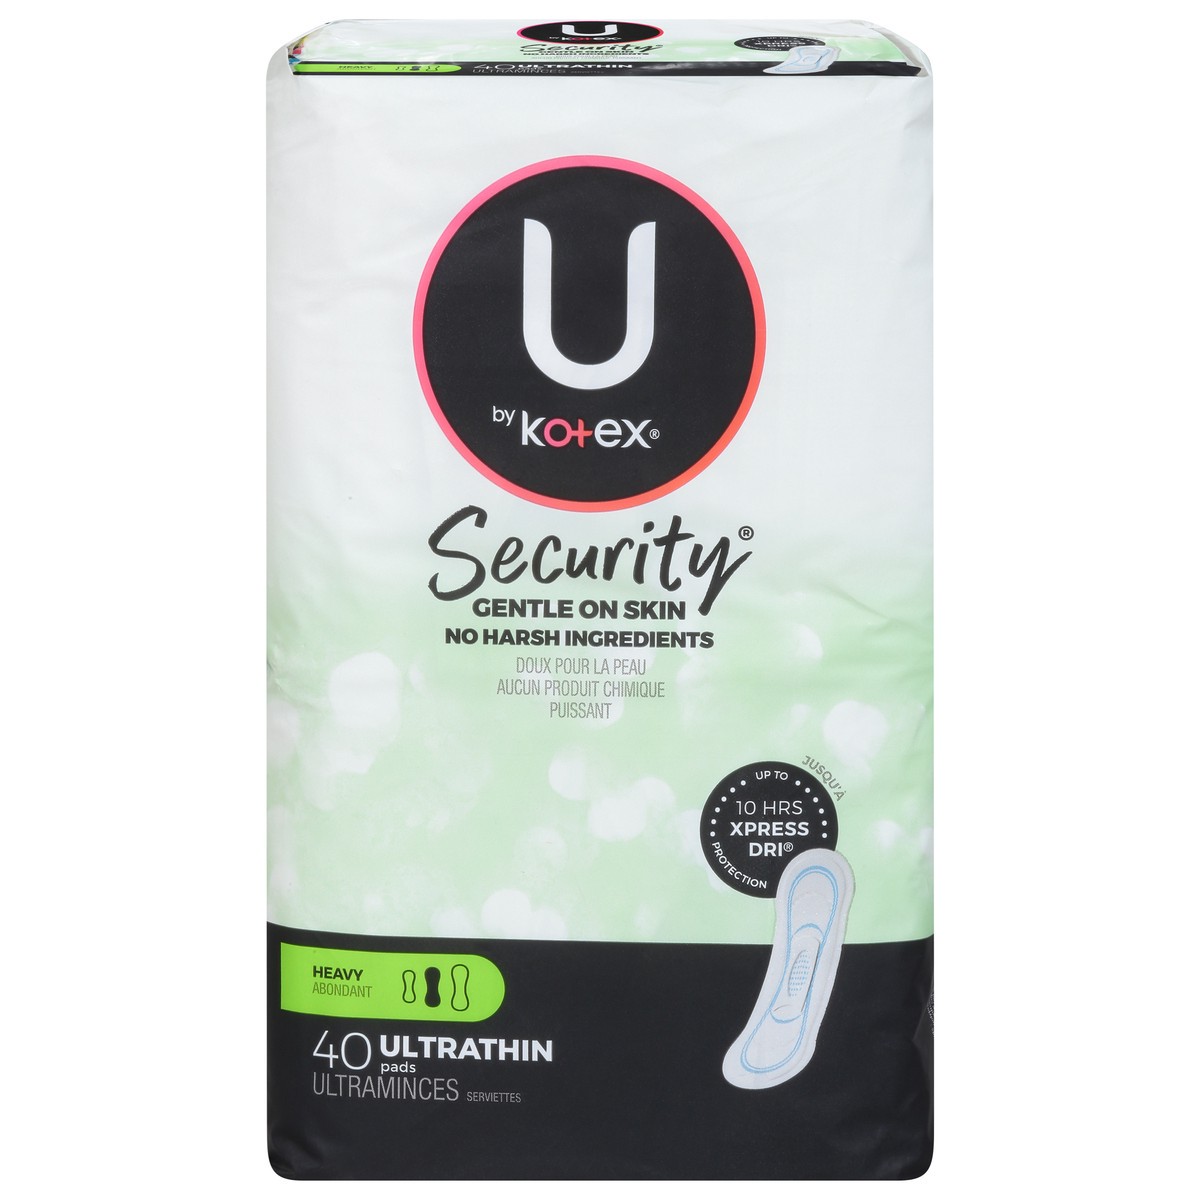 slide 1 of 16, U by Kotex Security Heavy Ultra Thin Pads 40 ea, 40 ct